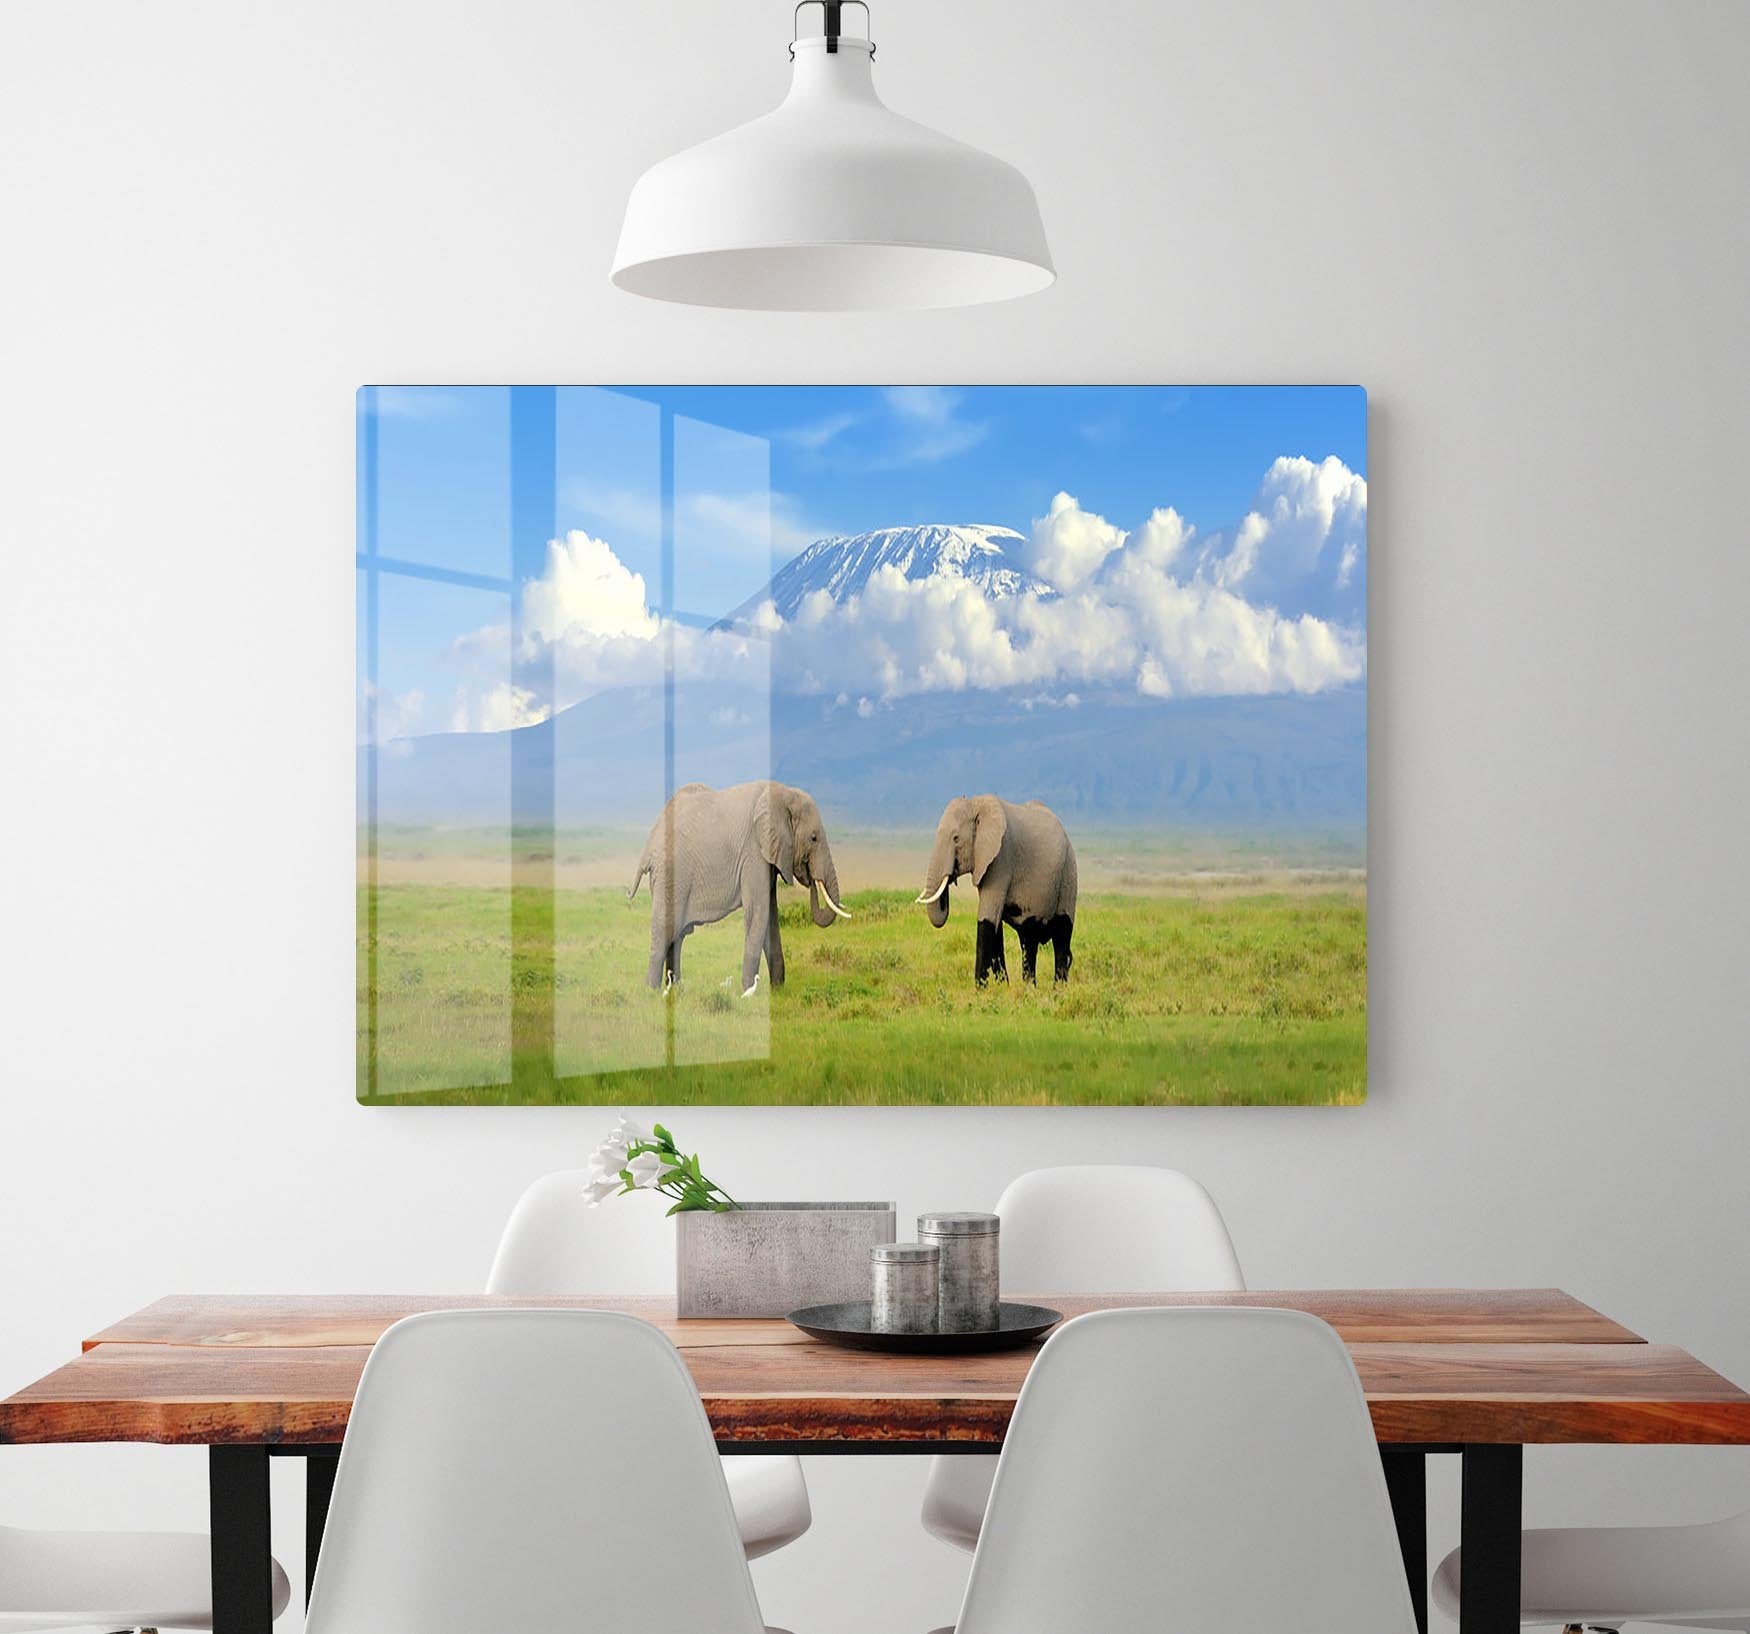 Elephant with Mount Kilimanjaro in the background HD Metal Print - Canvas Art Rocks - 2